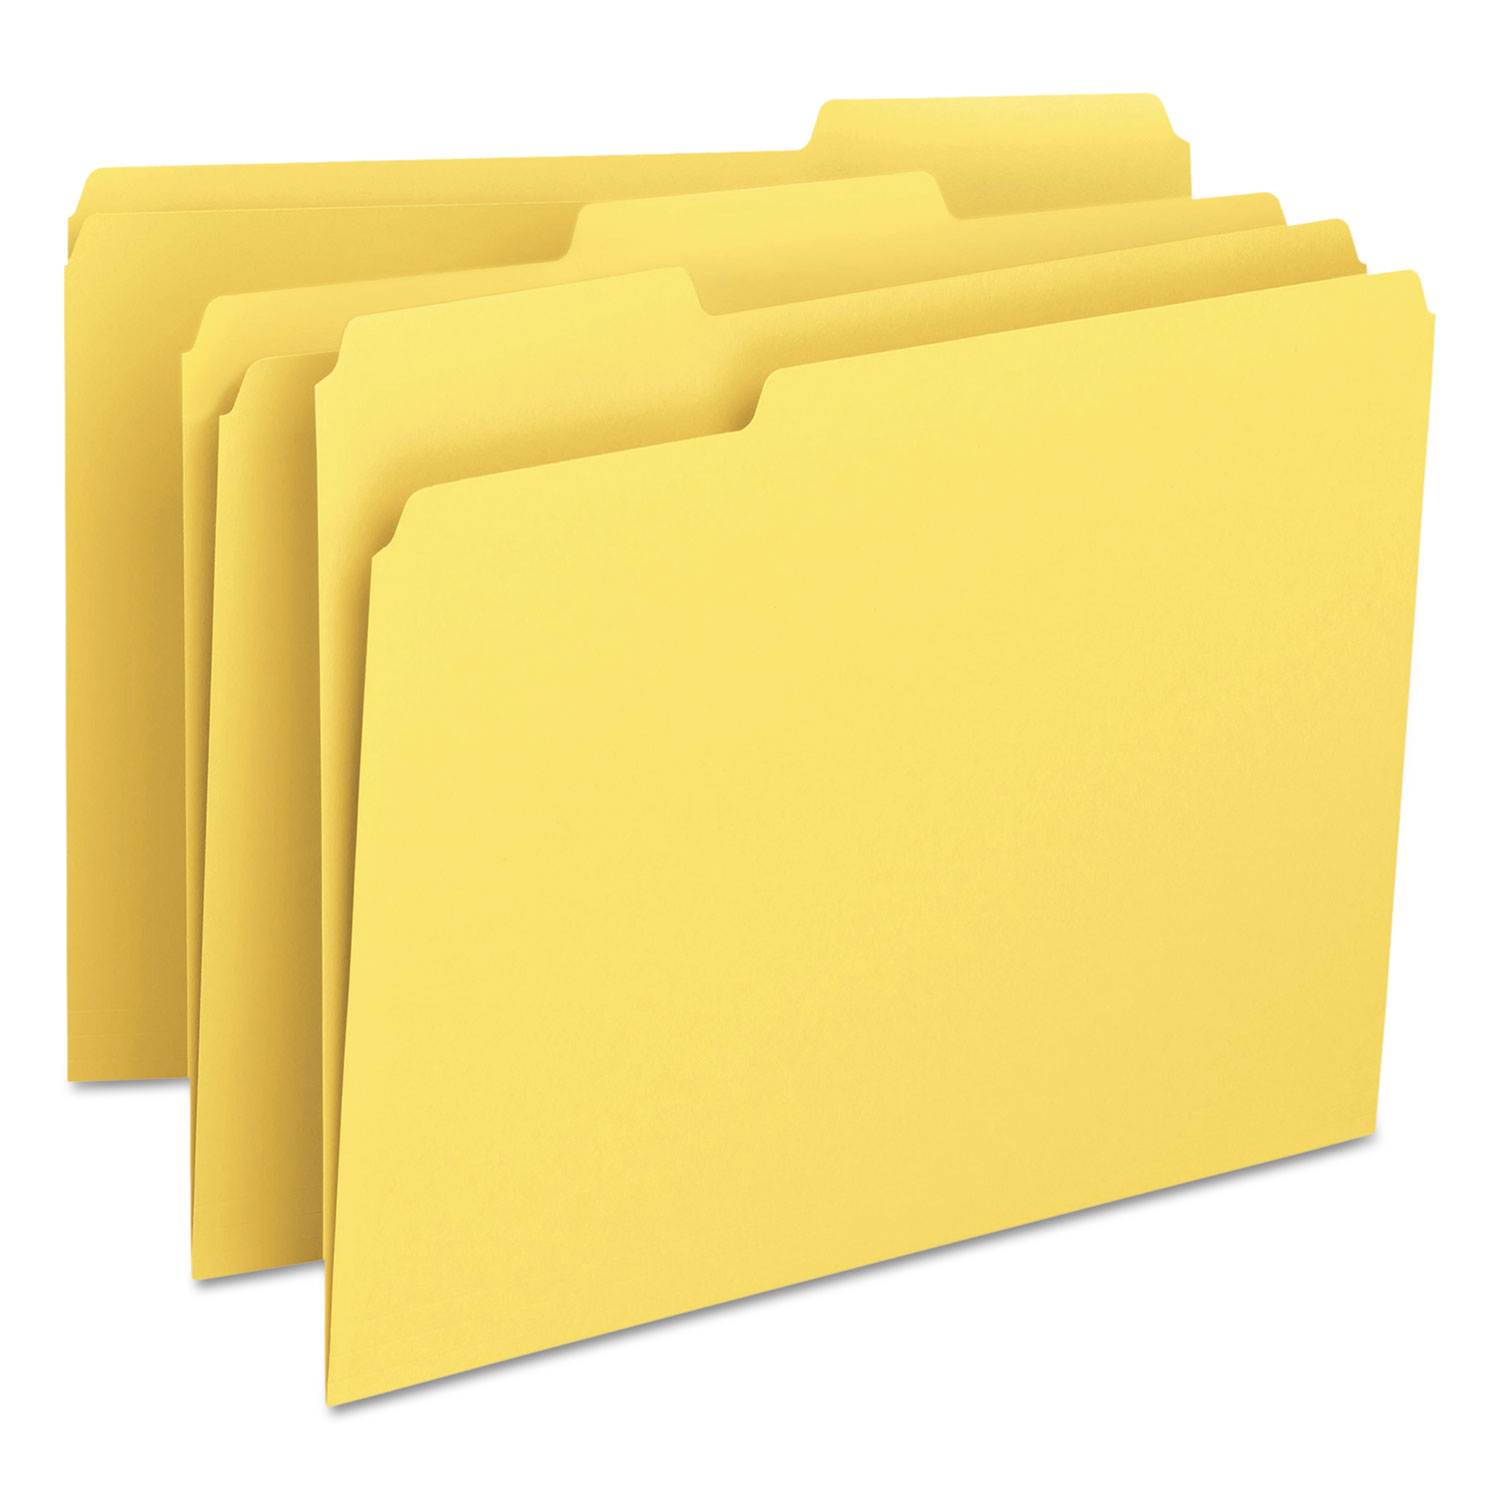  Smead 12943 Colored File Folders, 1/3-Cut Tabs, Letter Size, Yellow, 100/Box (SMD12943) 